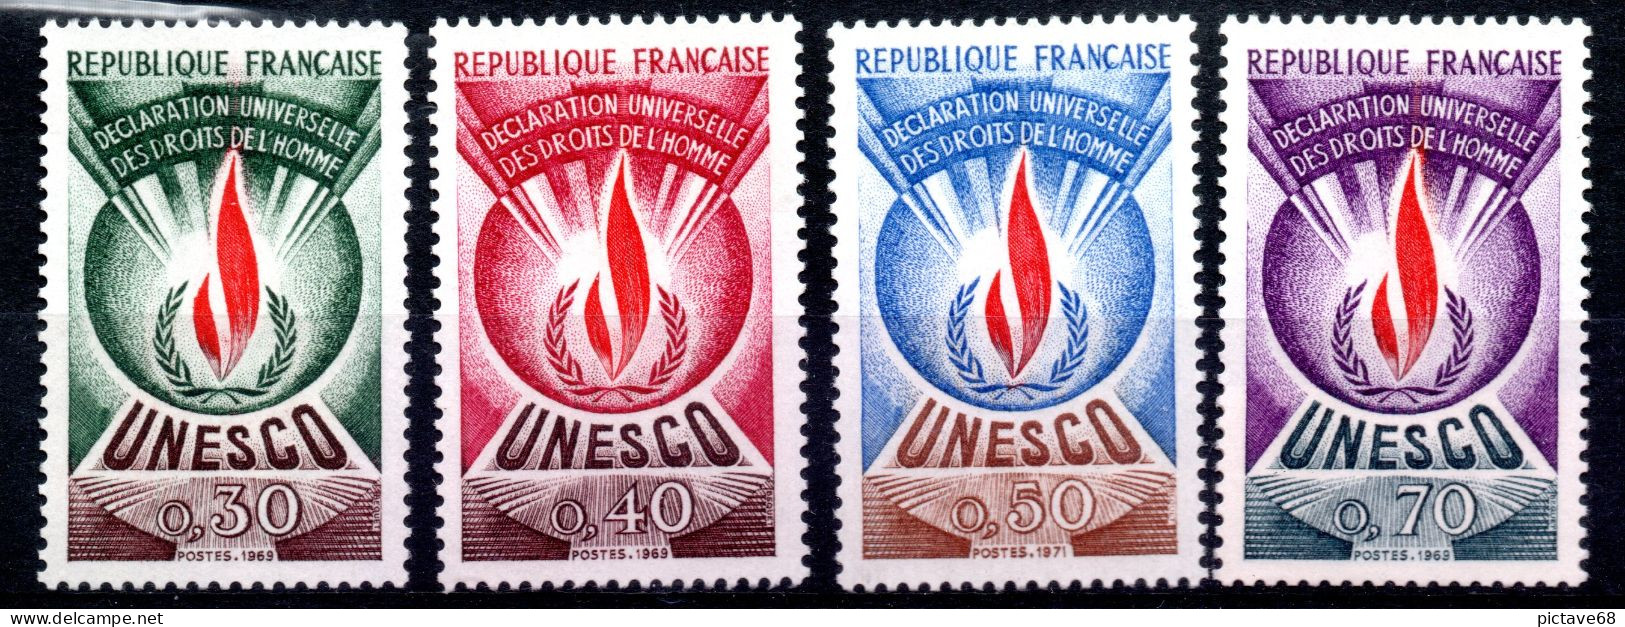 FRANCE / TIMBRES SERVICE/ N°39 à 42 UNESCO NEUF** - Mint/Hinged